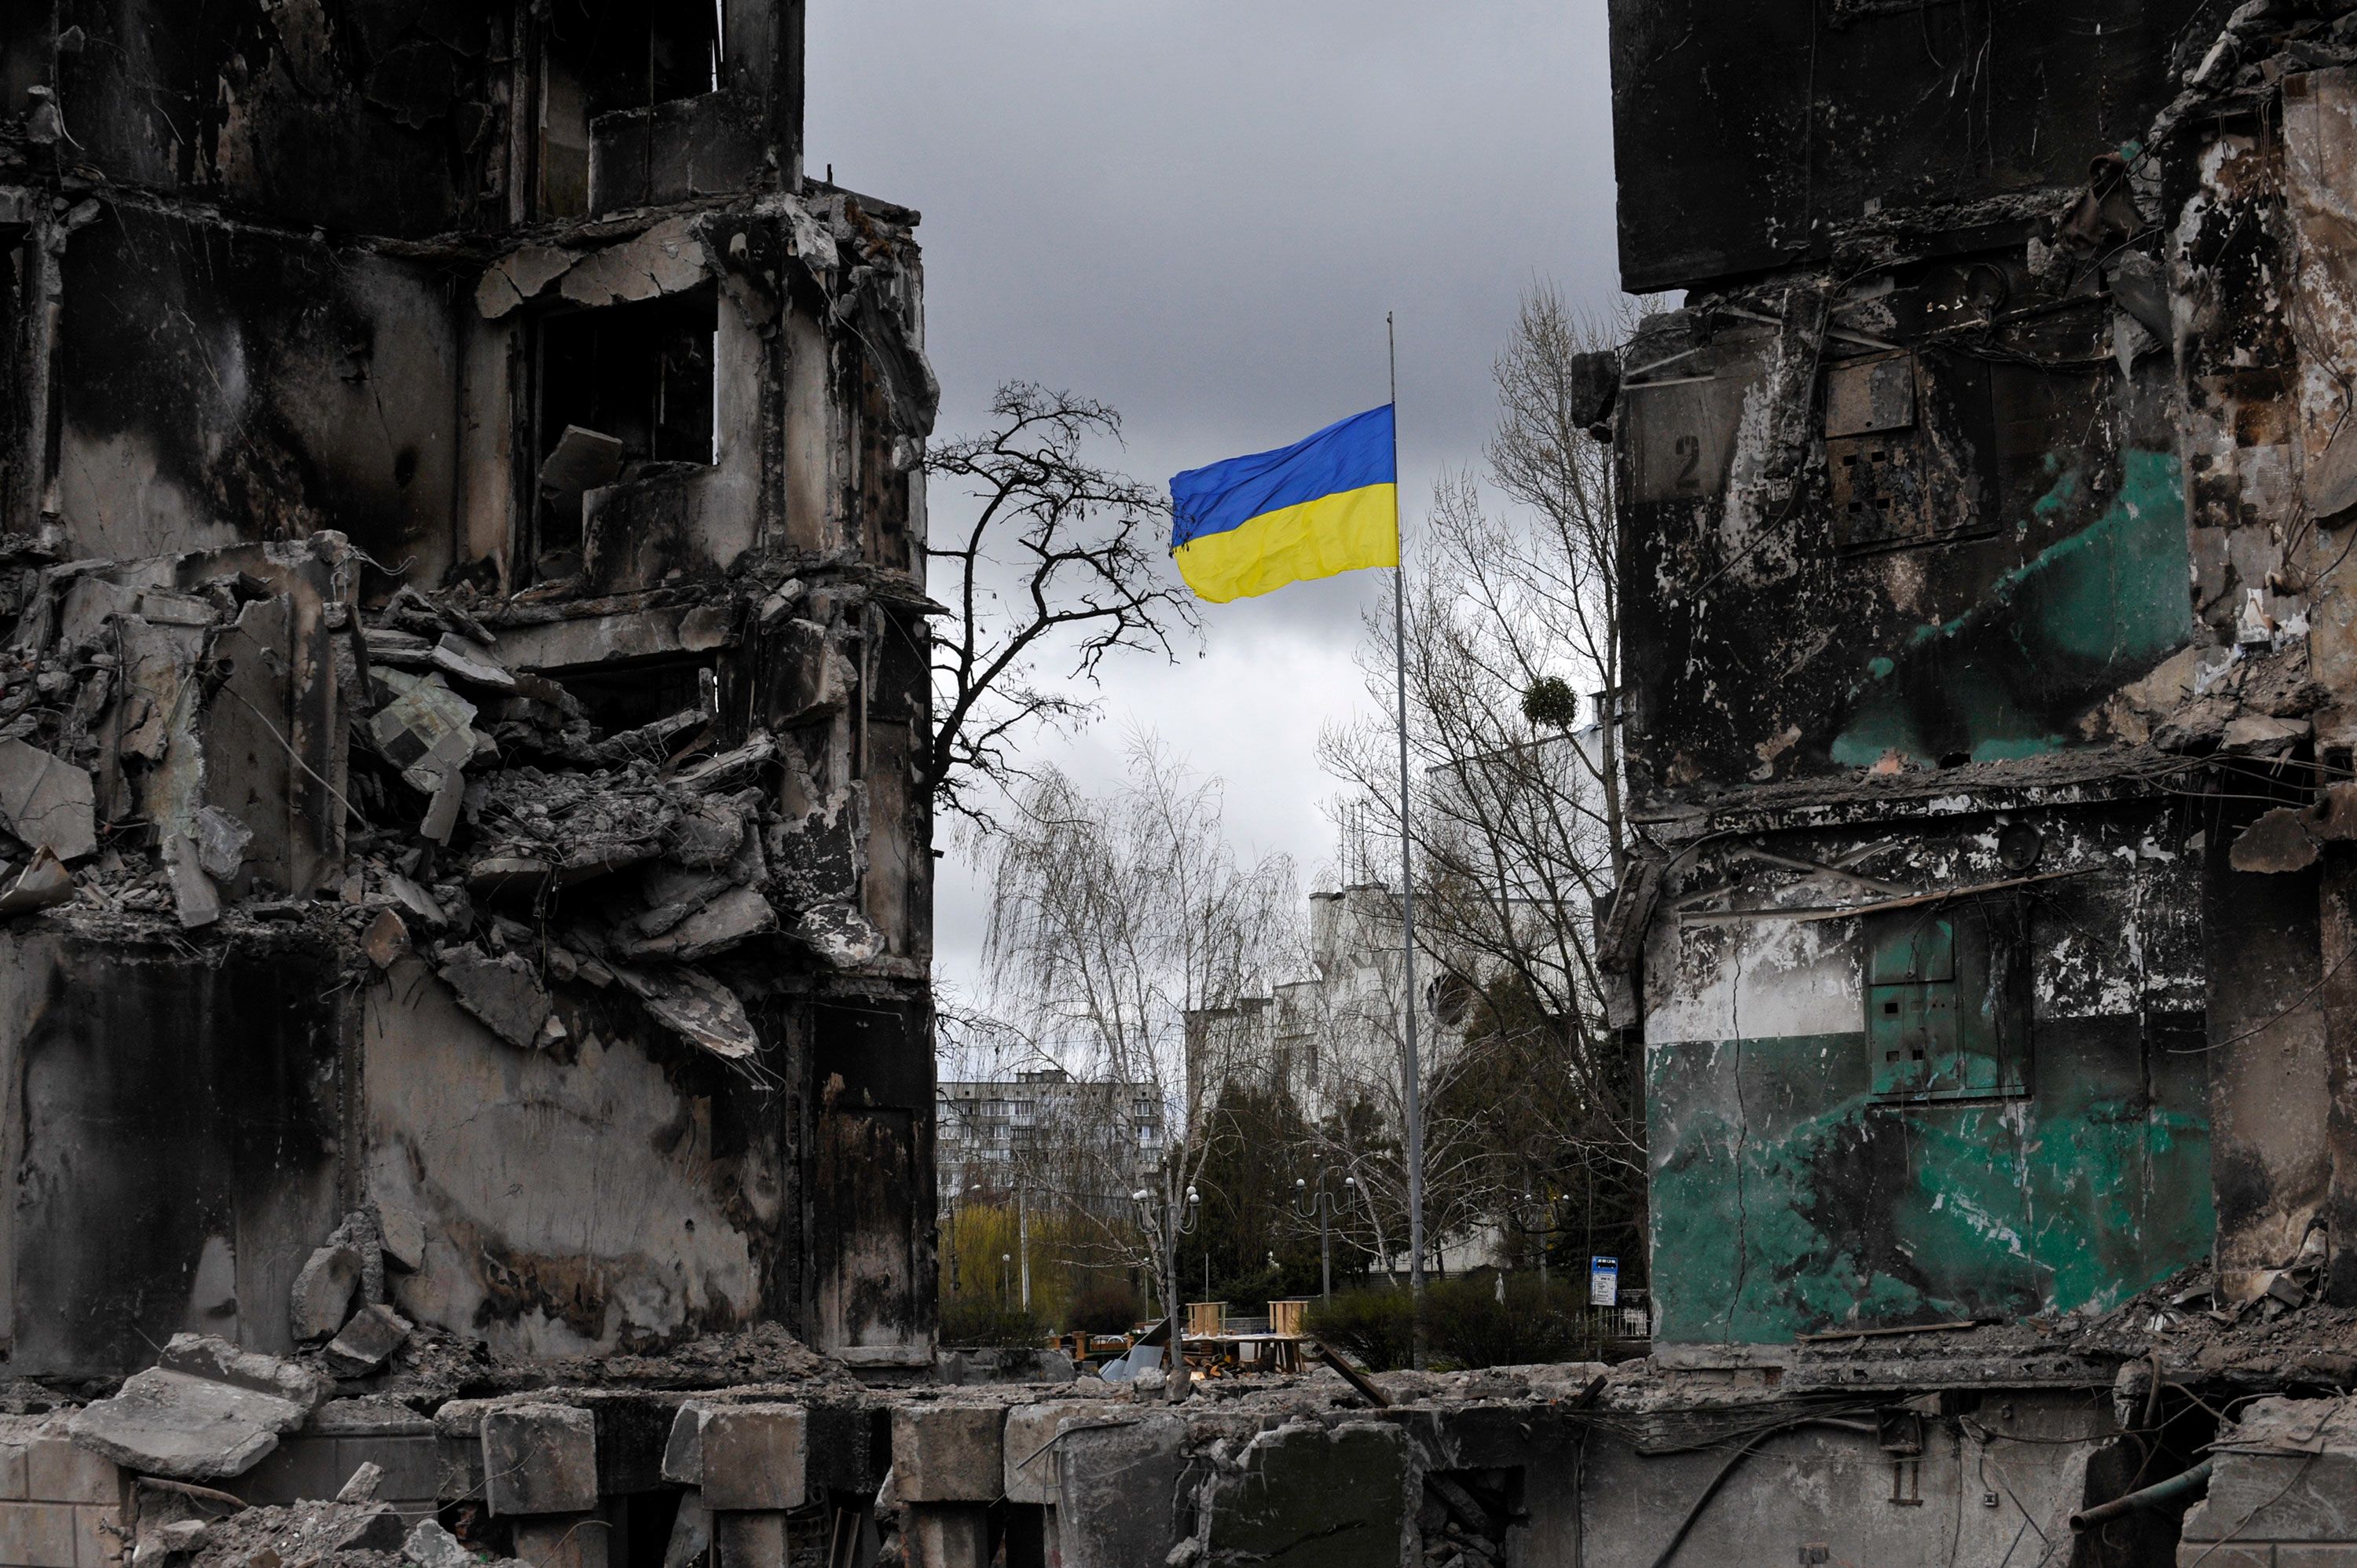 A Ukrainian flag flys in a damaged residential area in the city of Borodianka, northwest of the Ukrainian capital Kyiv. In Borodyanka in the Kiev region, rescuers pulled out the bodies of 41 dead from under the rubble. This was reported by the press center of the State Service of Ukraine for Emergency Situations. Russia invaded Ukraine on 24 February 2022, triggering the largest military attack in Europe since World War II. (Photo by Sergei Chuzavkov/SOPA Images/Sipa USA)No Use Germany.